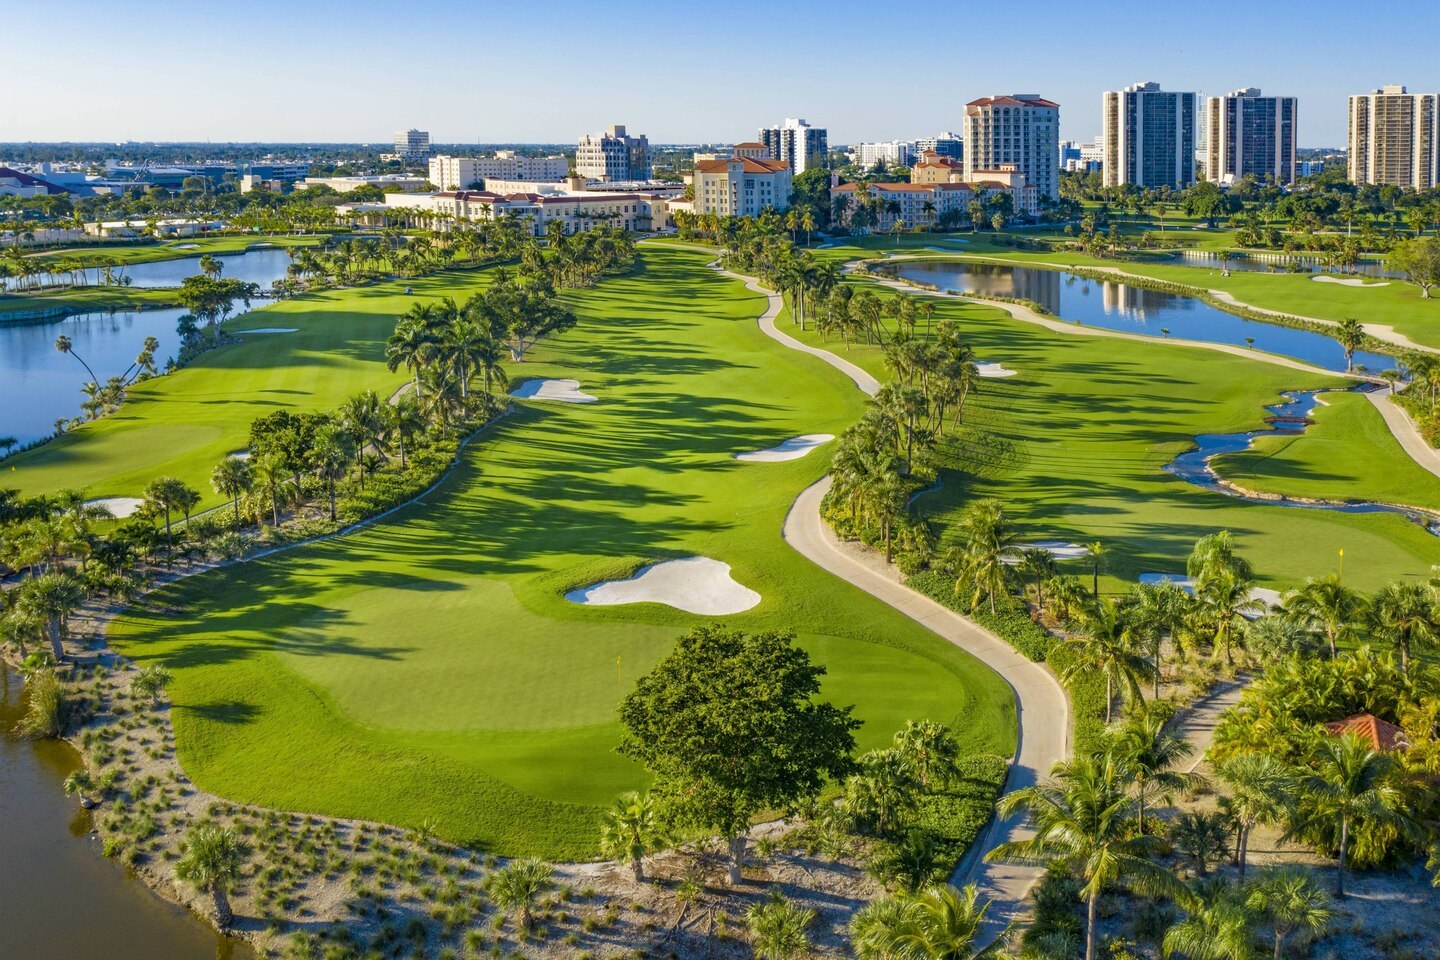 Golf Vacation Package - JW Marriott Miami Turnberry Resort & Spa Stay & Play from $346 per day!